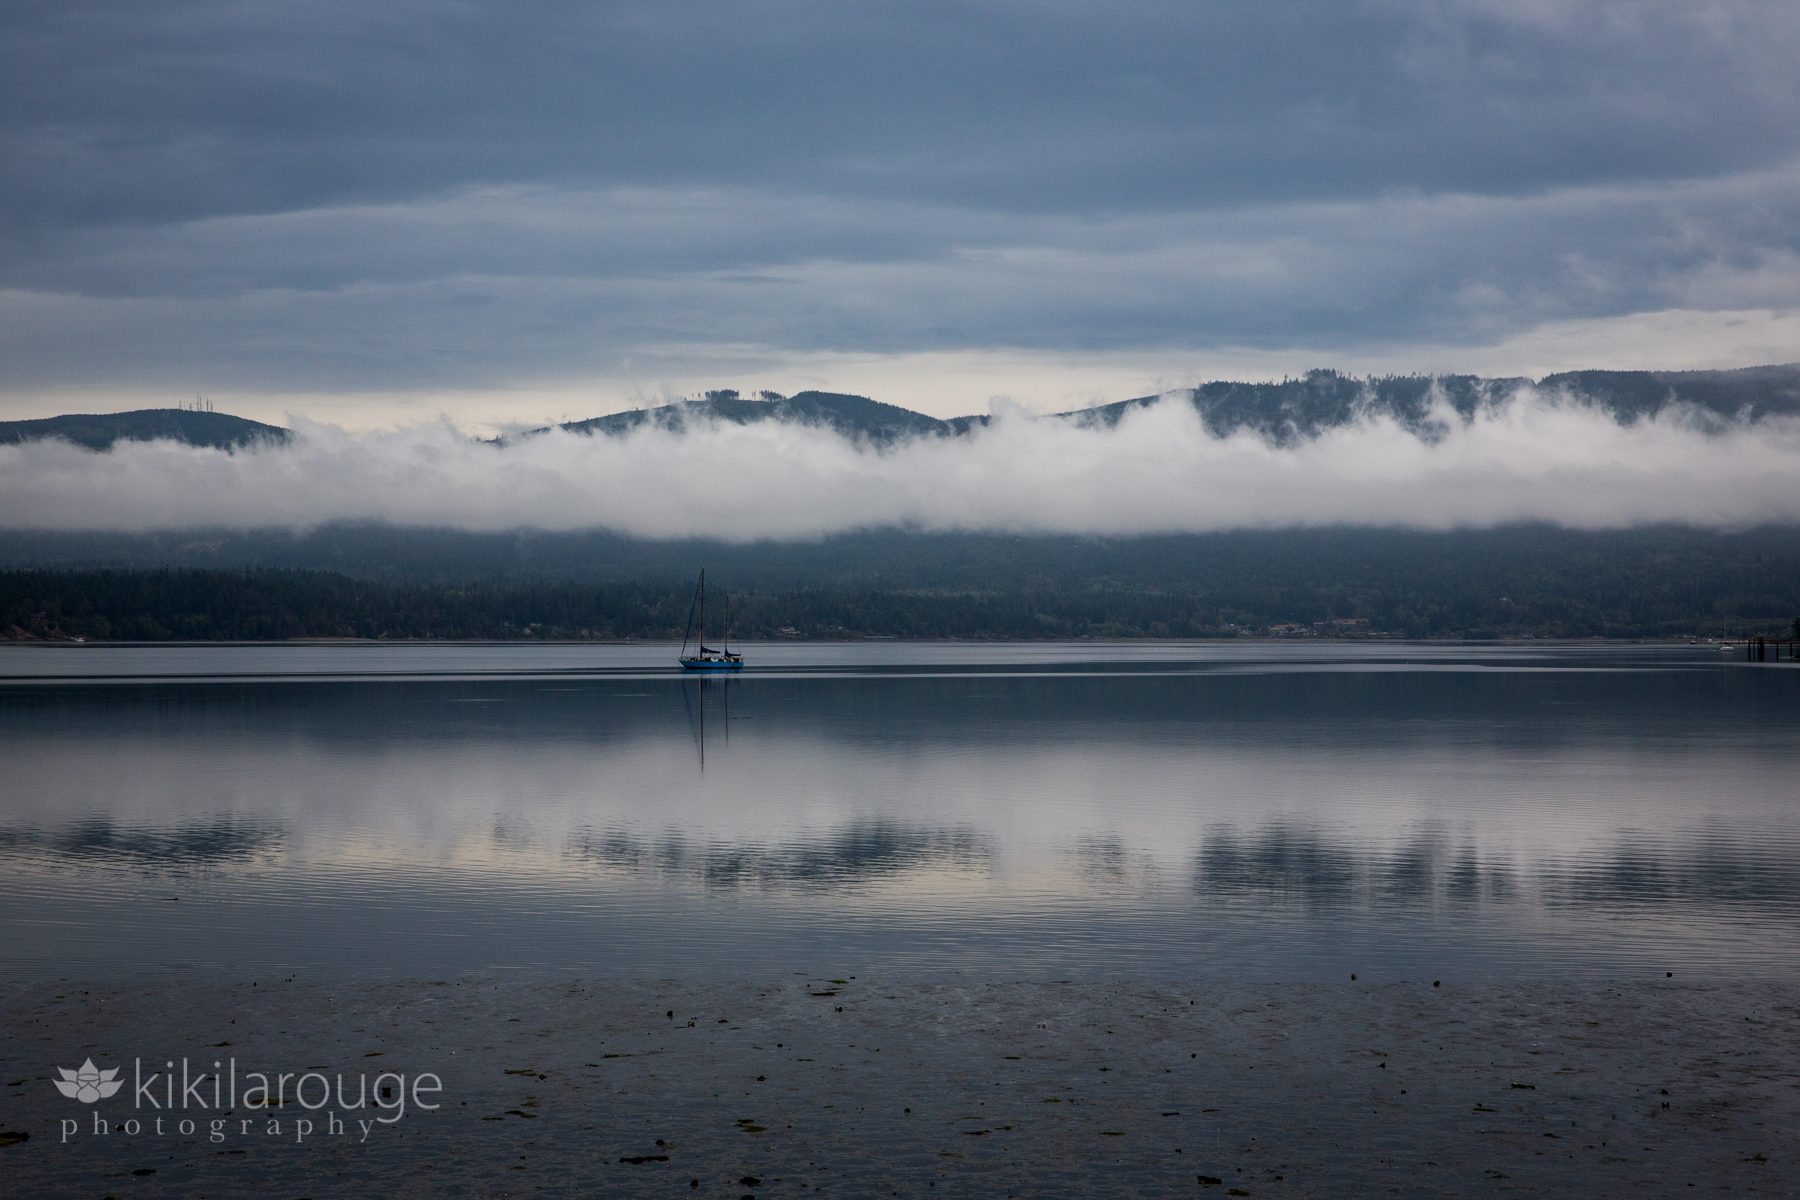 Lone boat in water with clouds over mountains and reflected in bay